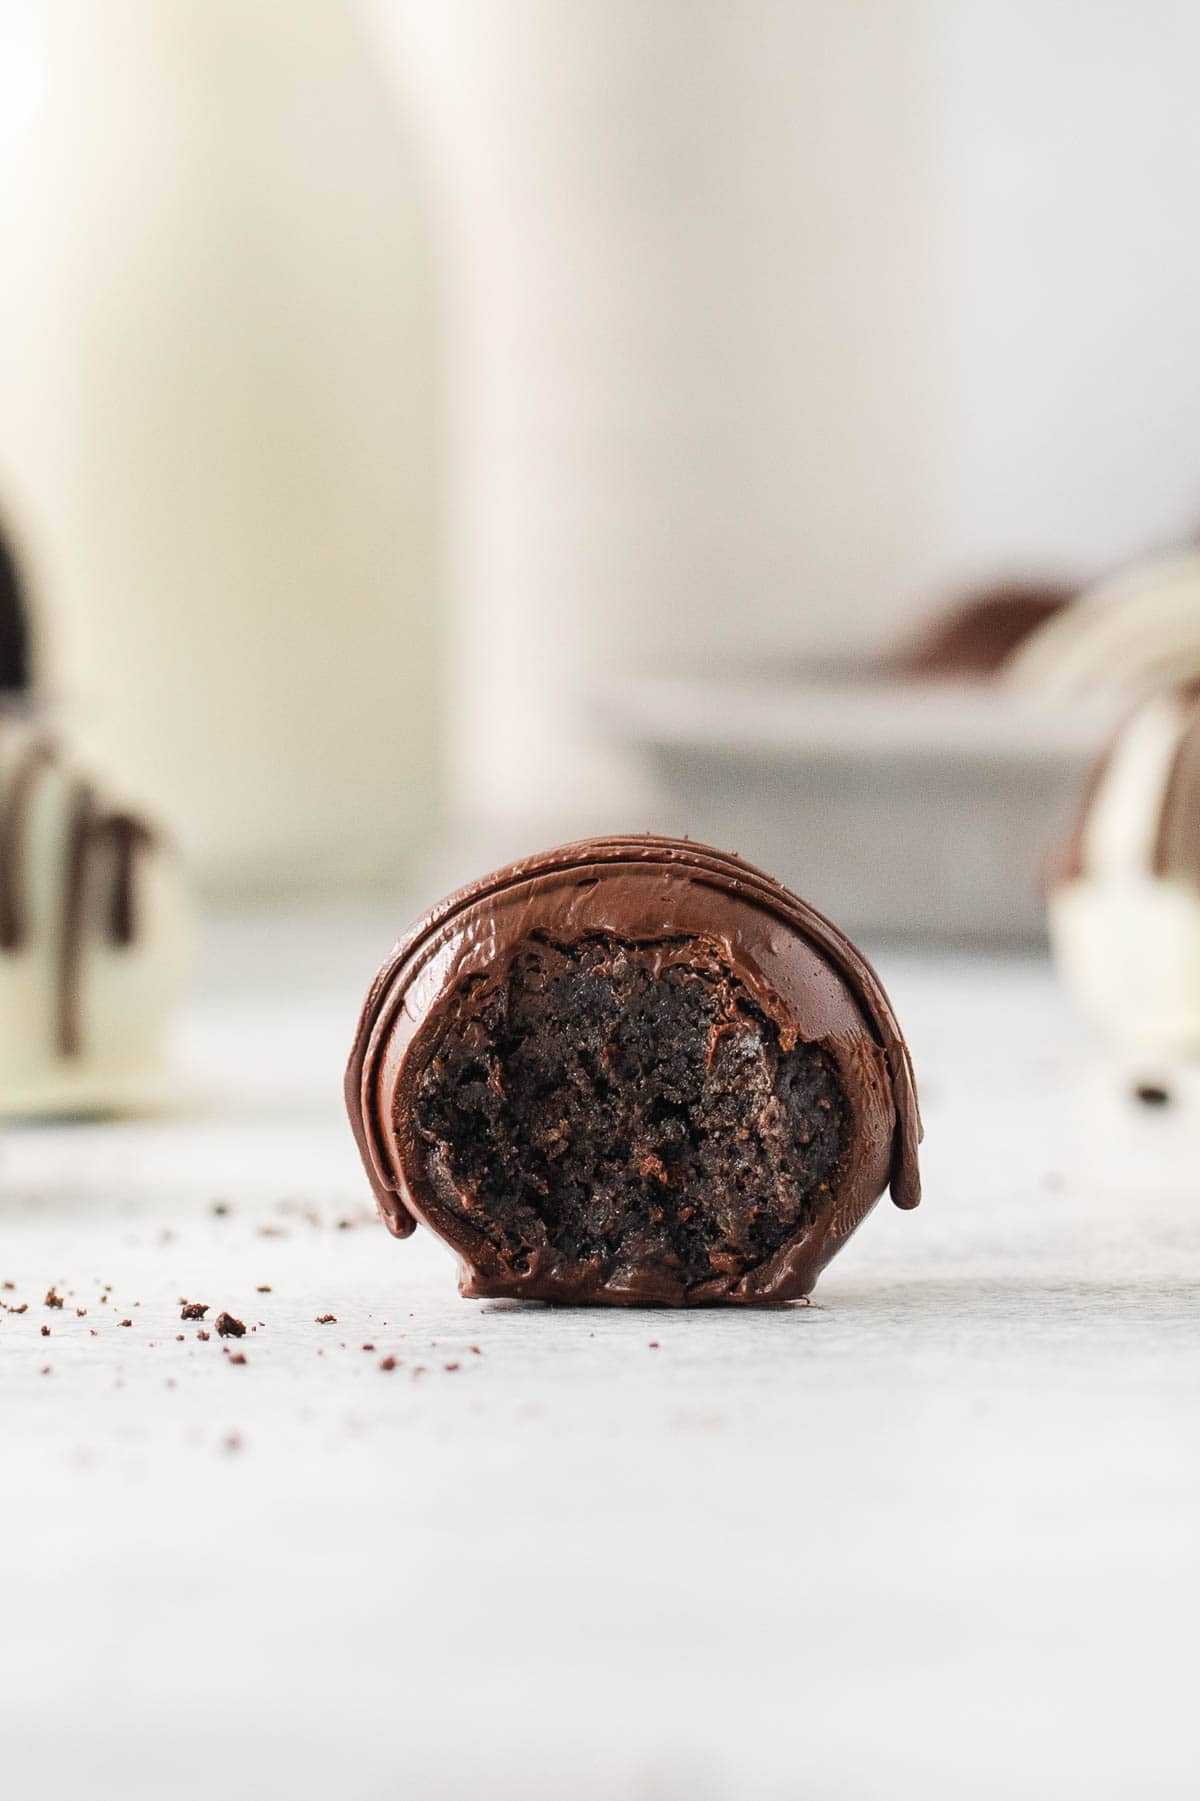 One gluten-free Oreo truffle on a countertop with a bit out of it